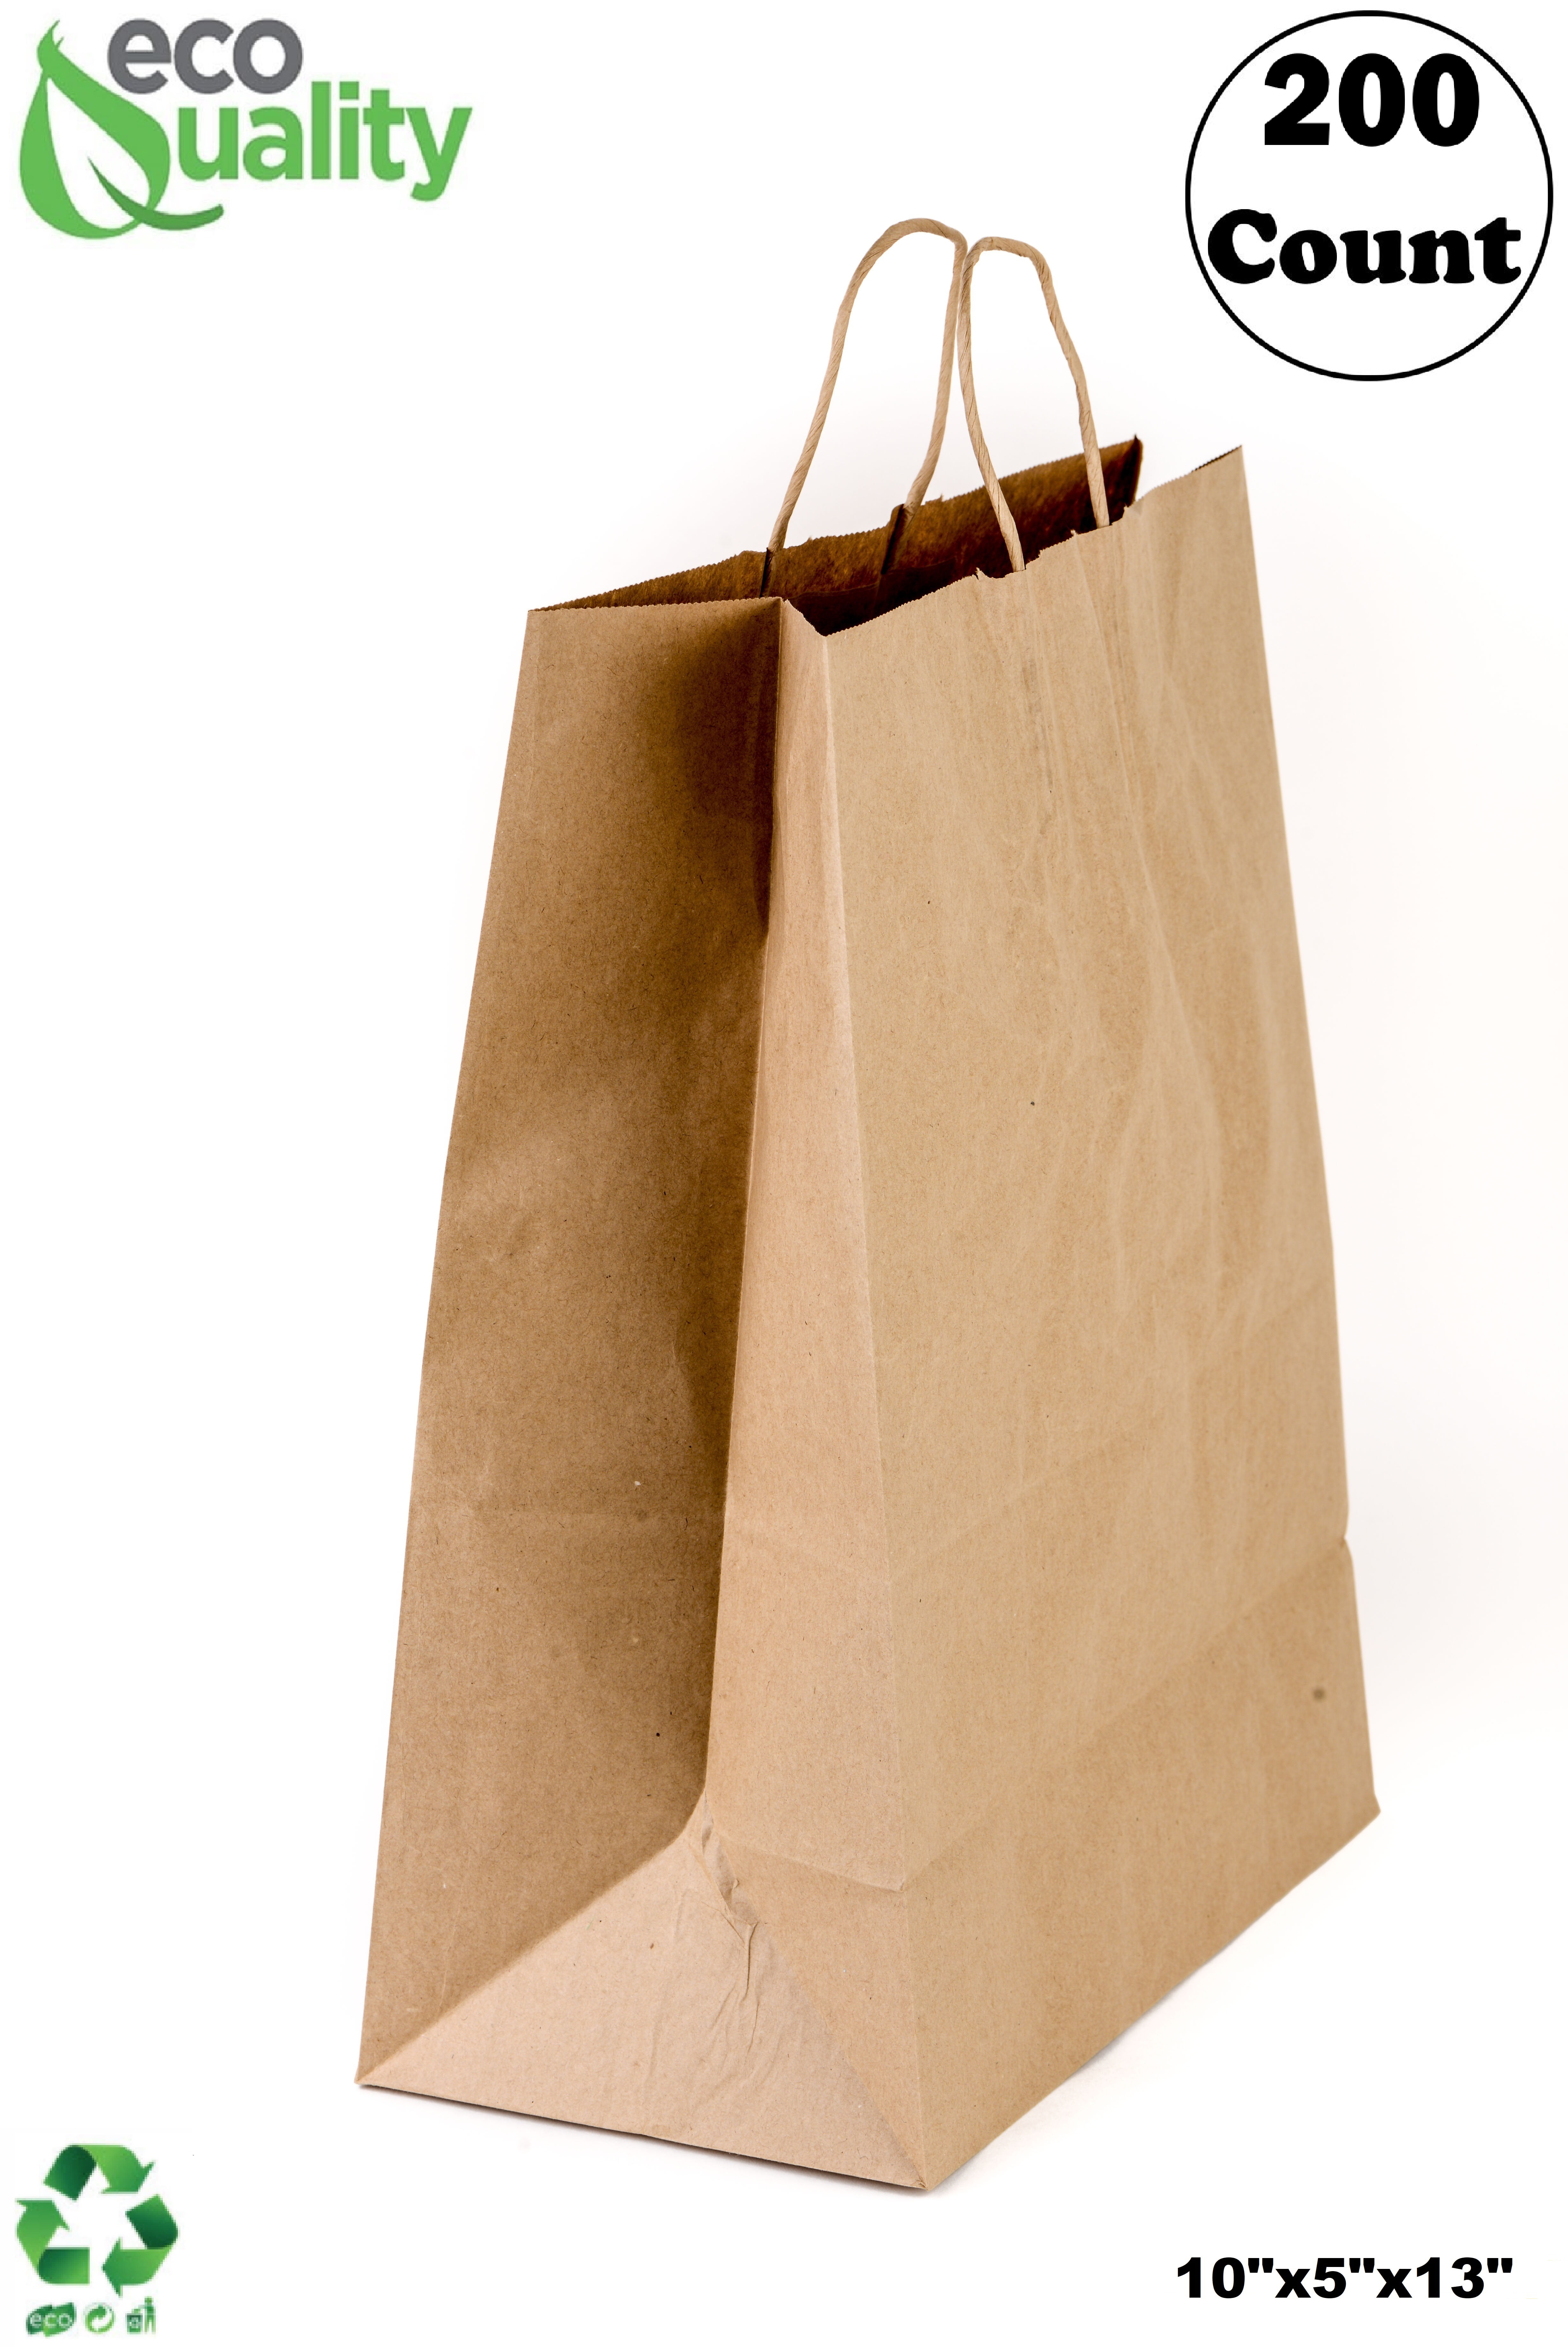 Candy Buffet Bags Notion Bags 200 Size 4 x 6 " Brown Kraft Paper Bags 